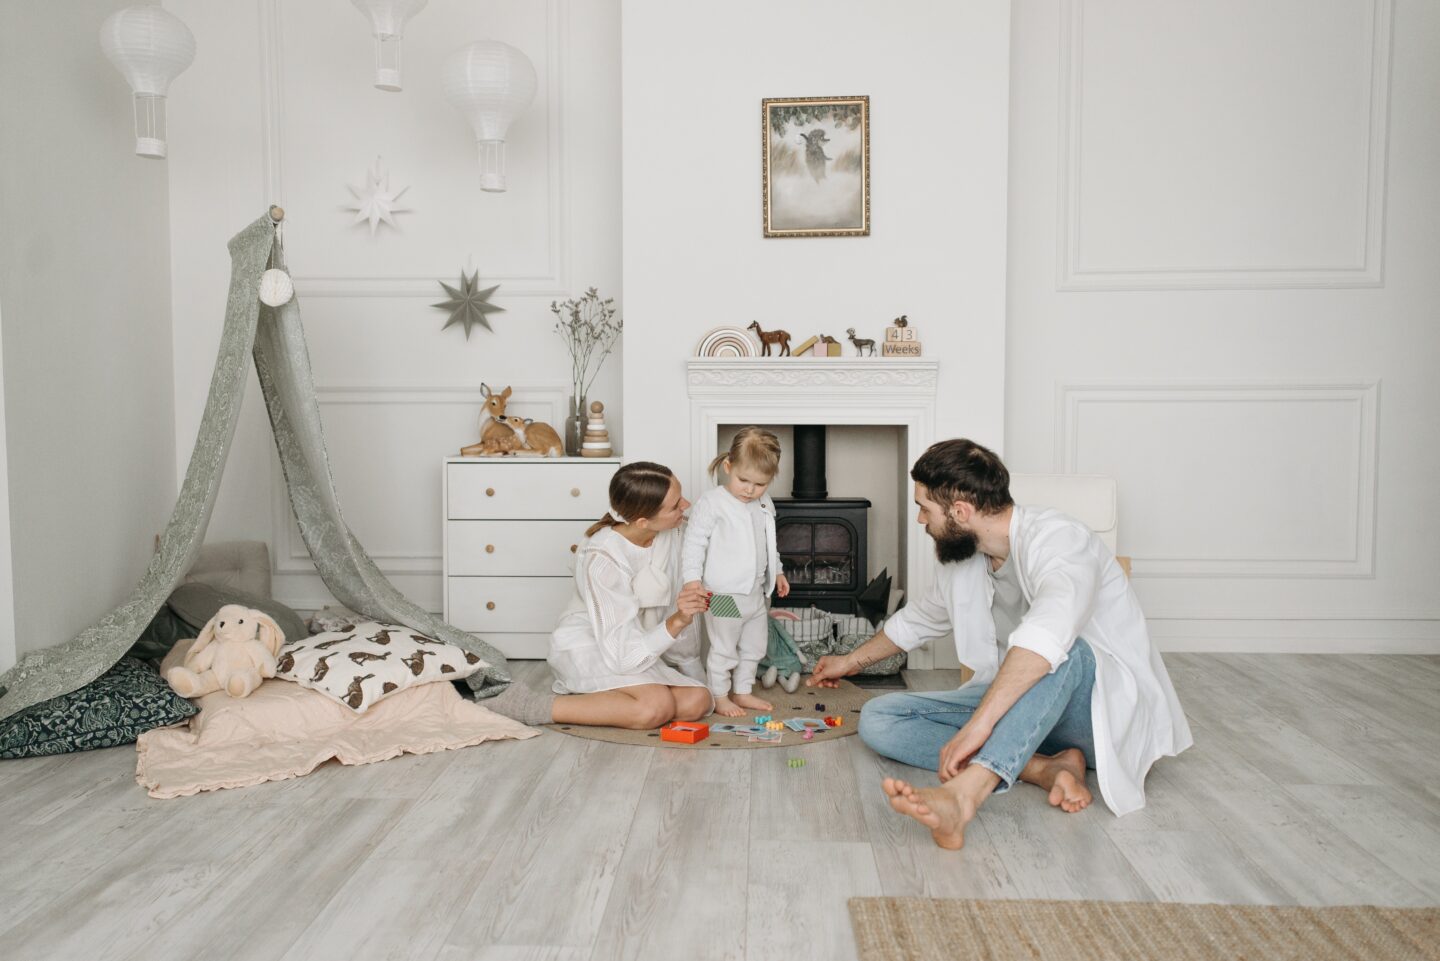 Family of three playing on the floor of a child's bedroom with teepee in the background